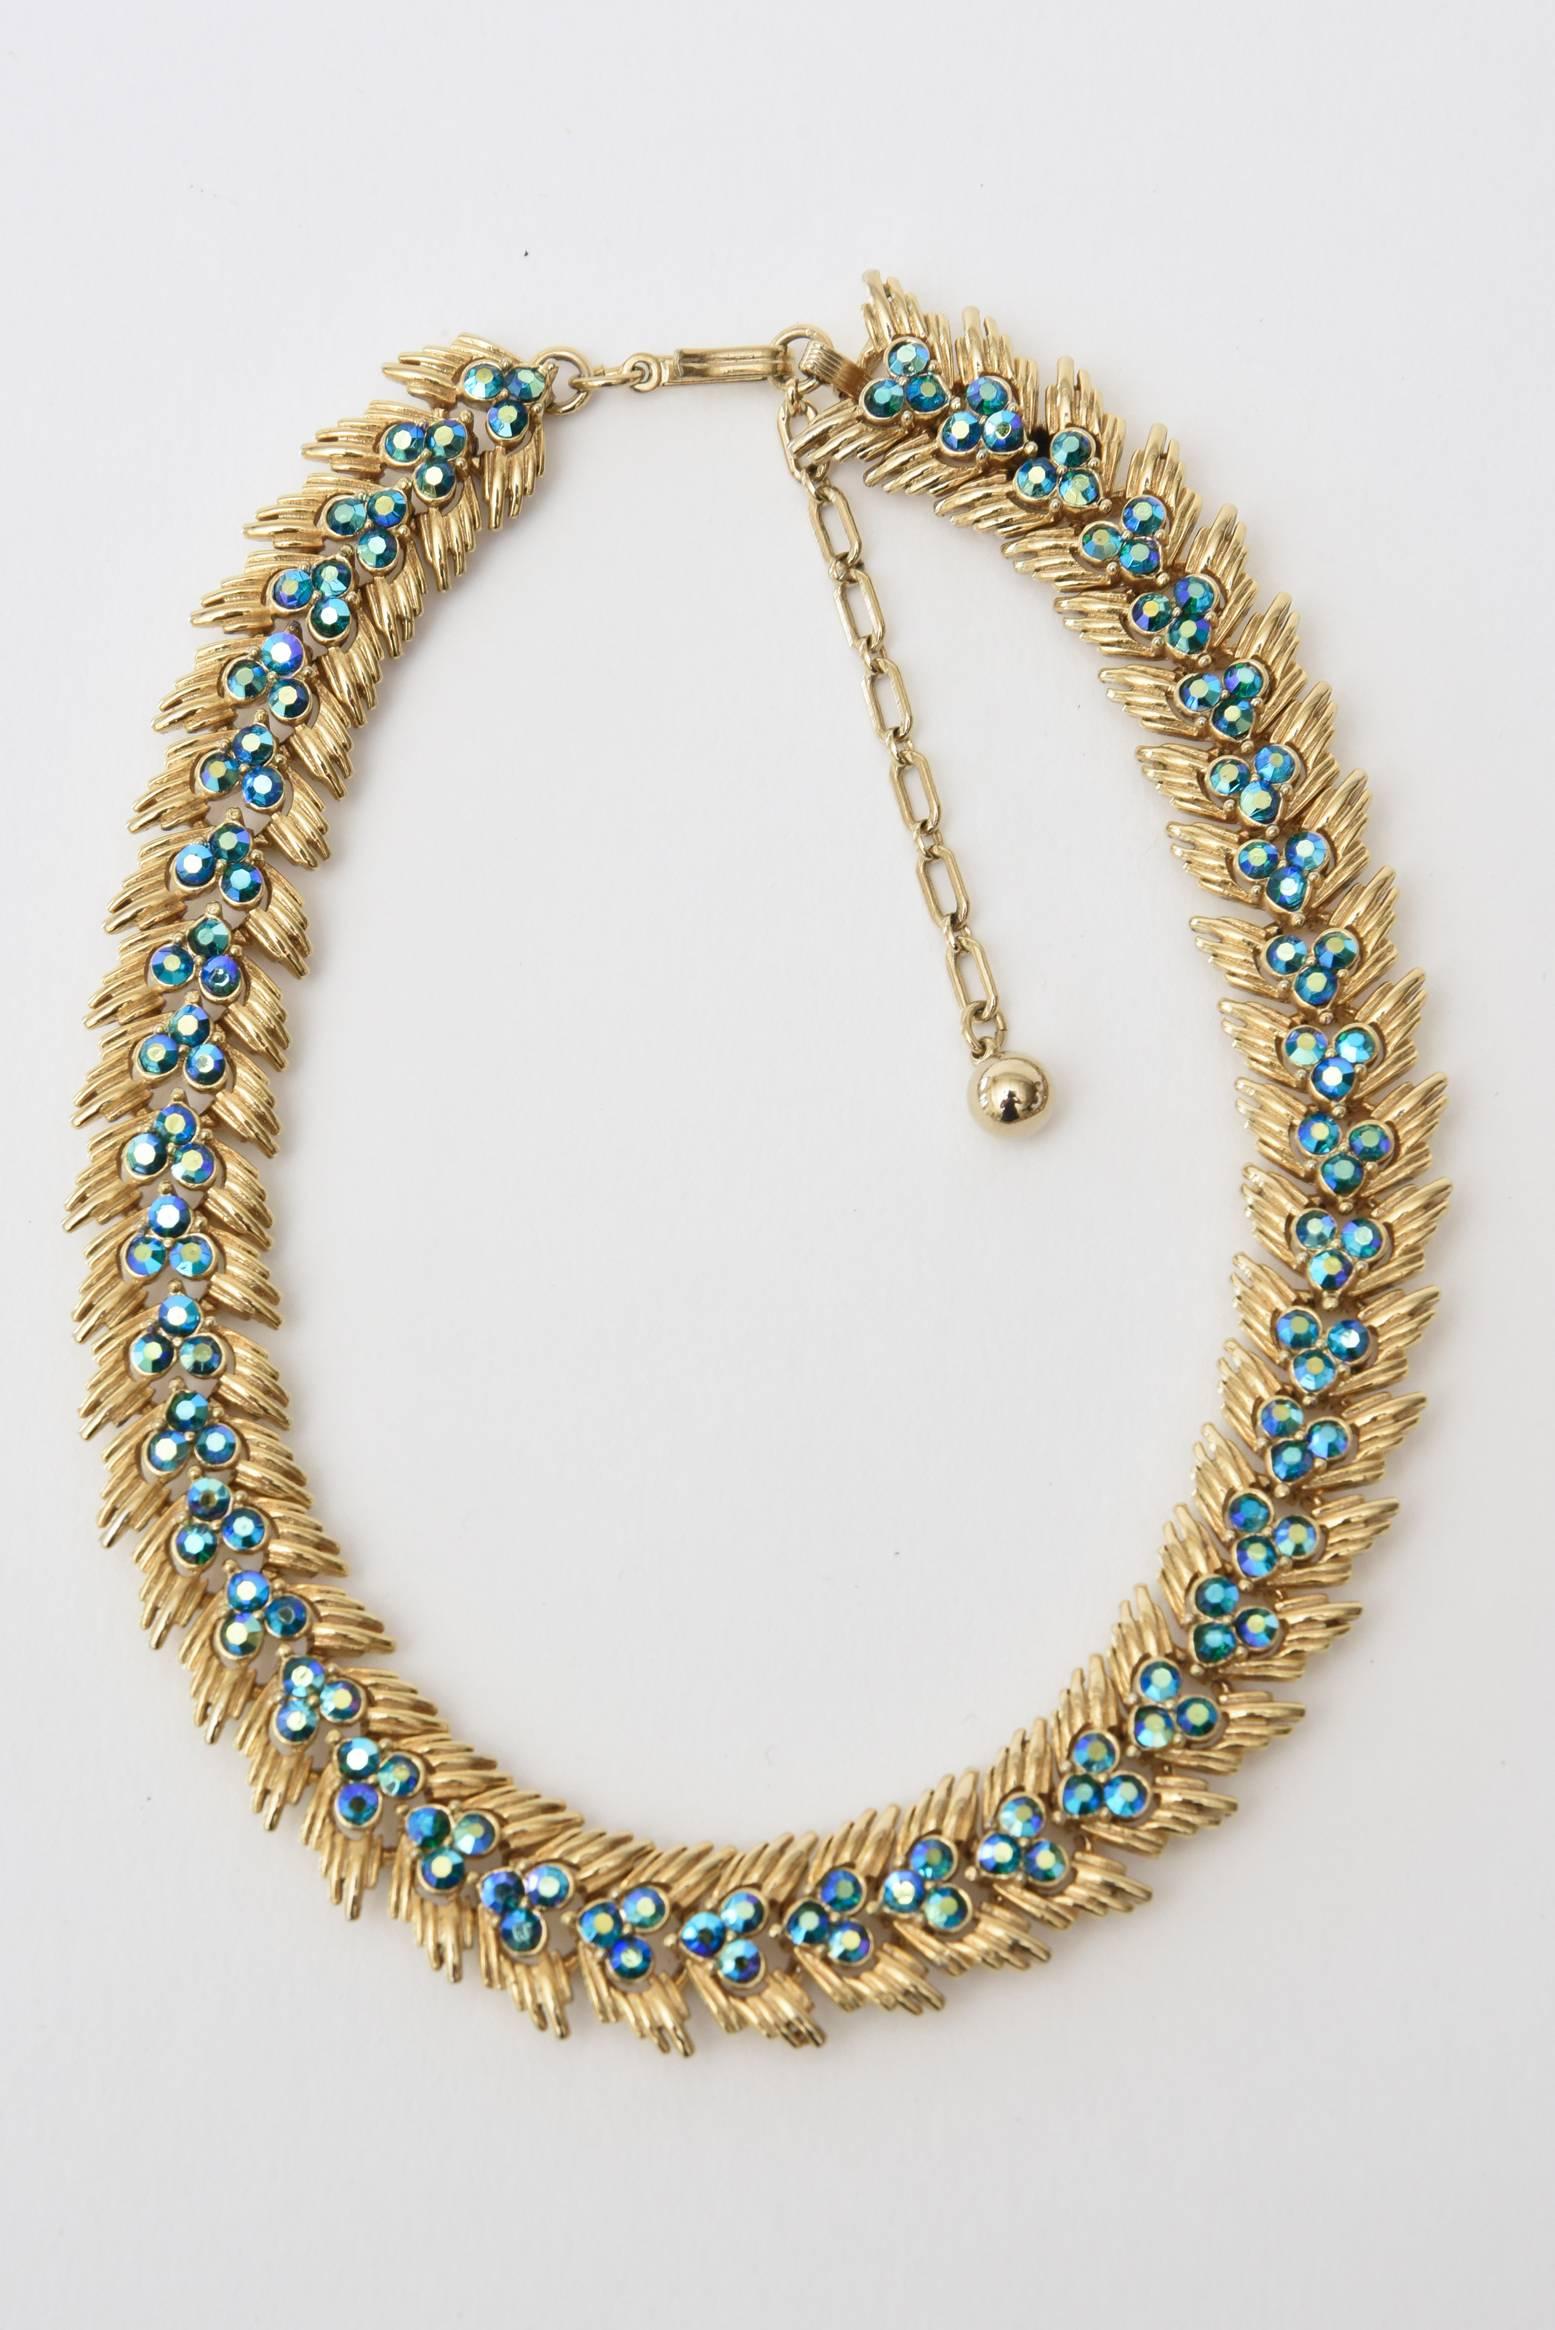 This beautifully made vintage costume jewelry set by Trifari is mid century modern. It is a choker necklace with matching clip on earrings. It is a luscious peacock sapphire blue to turquoise in color. The crystal stones are boris aurelius. The two